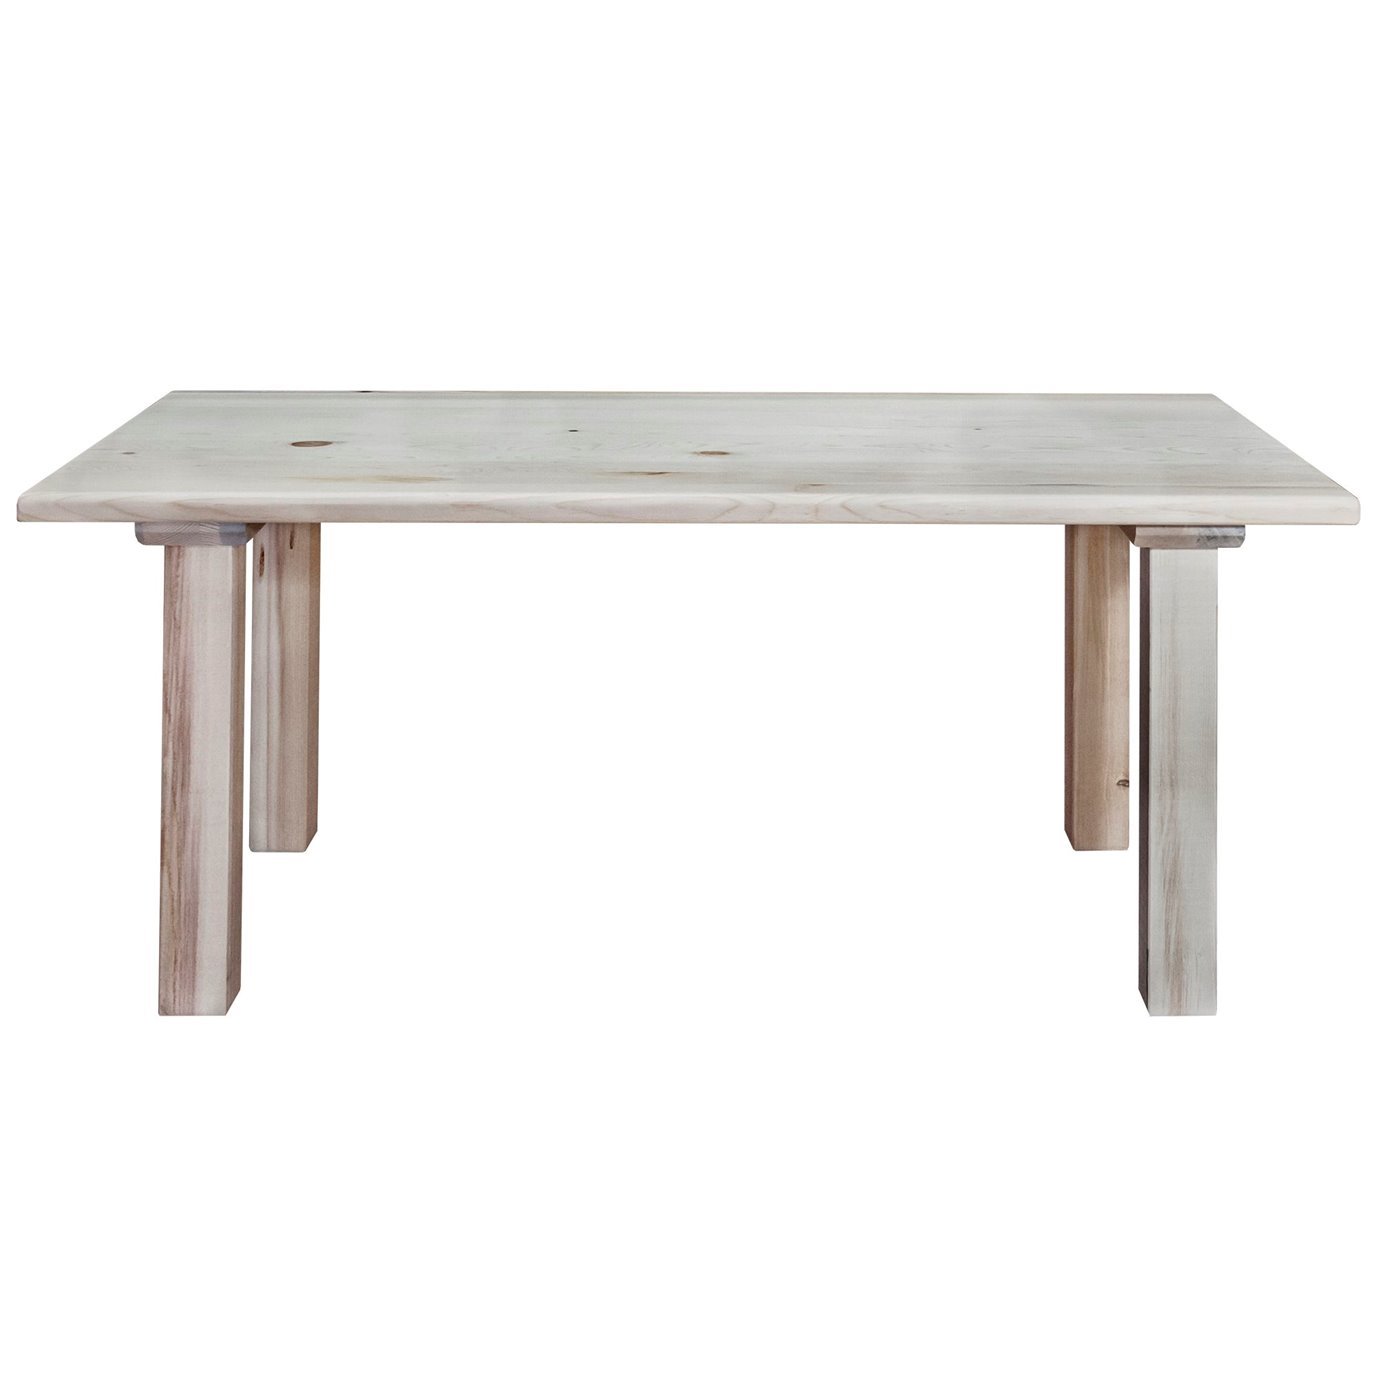 Homestead Child's Table - Clear Lacquer Finish